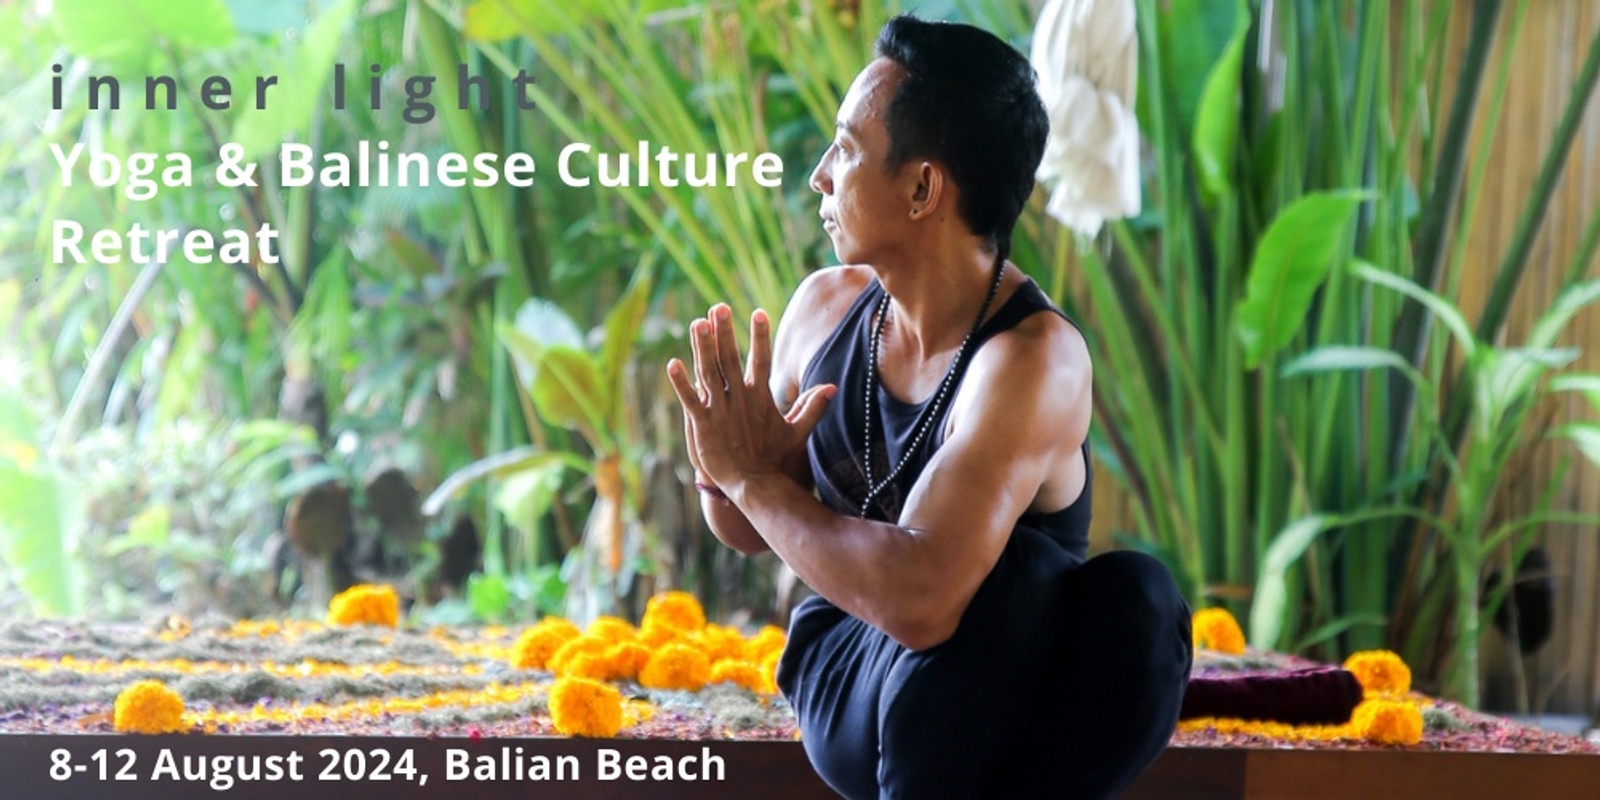 Banner image for Yoga & Balinese Culture Retreat with Nicky Sudianta August 2024